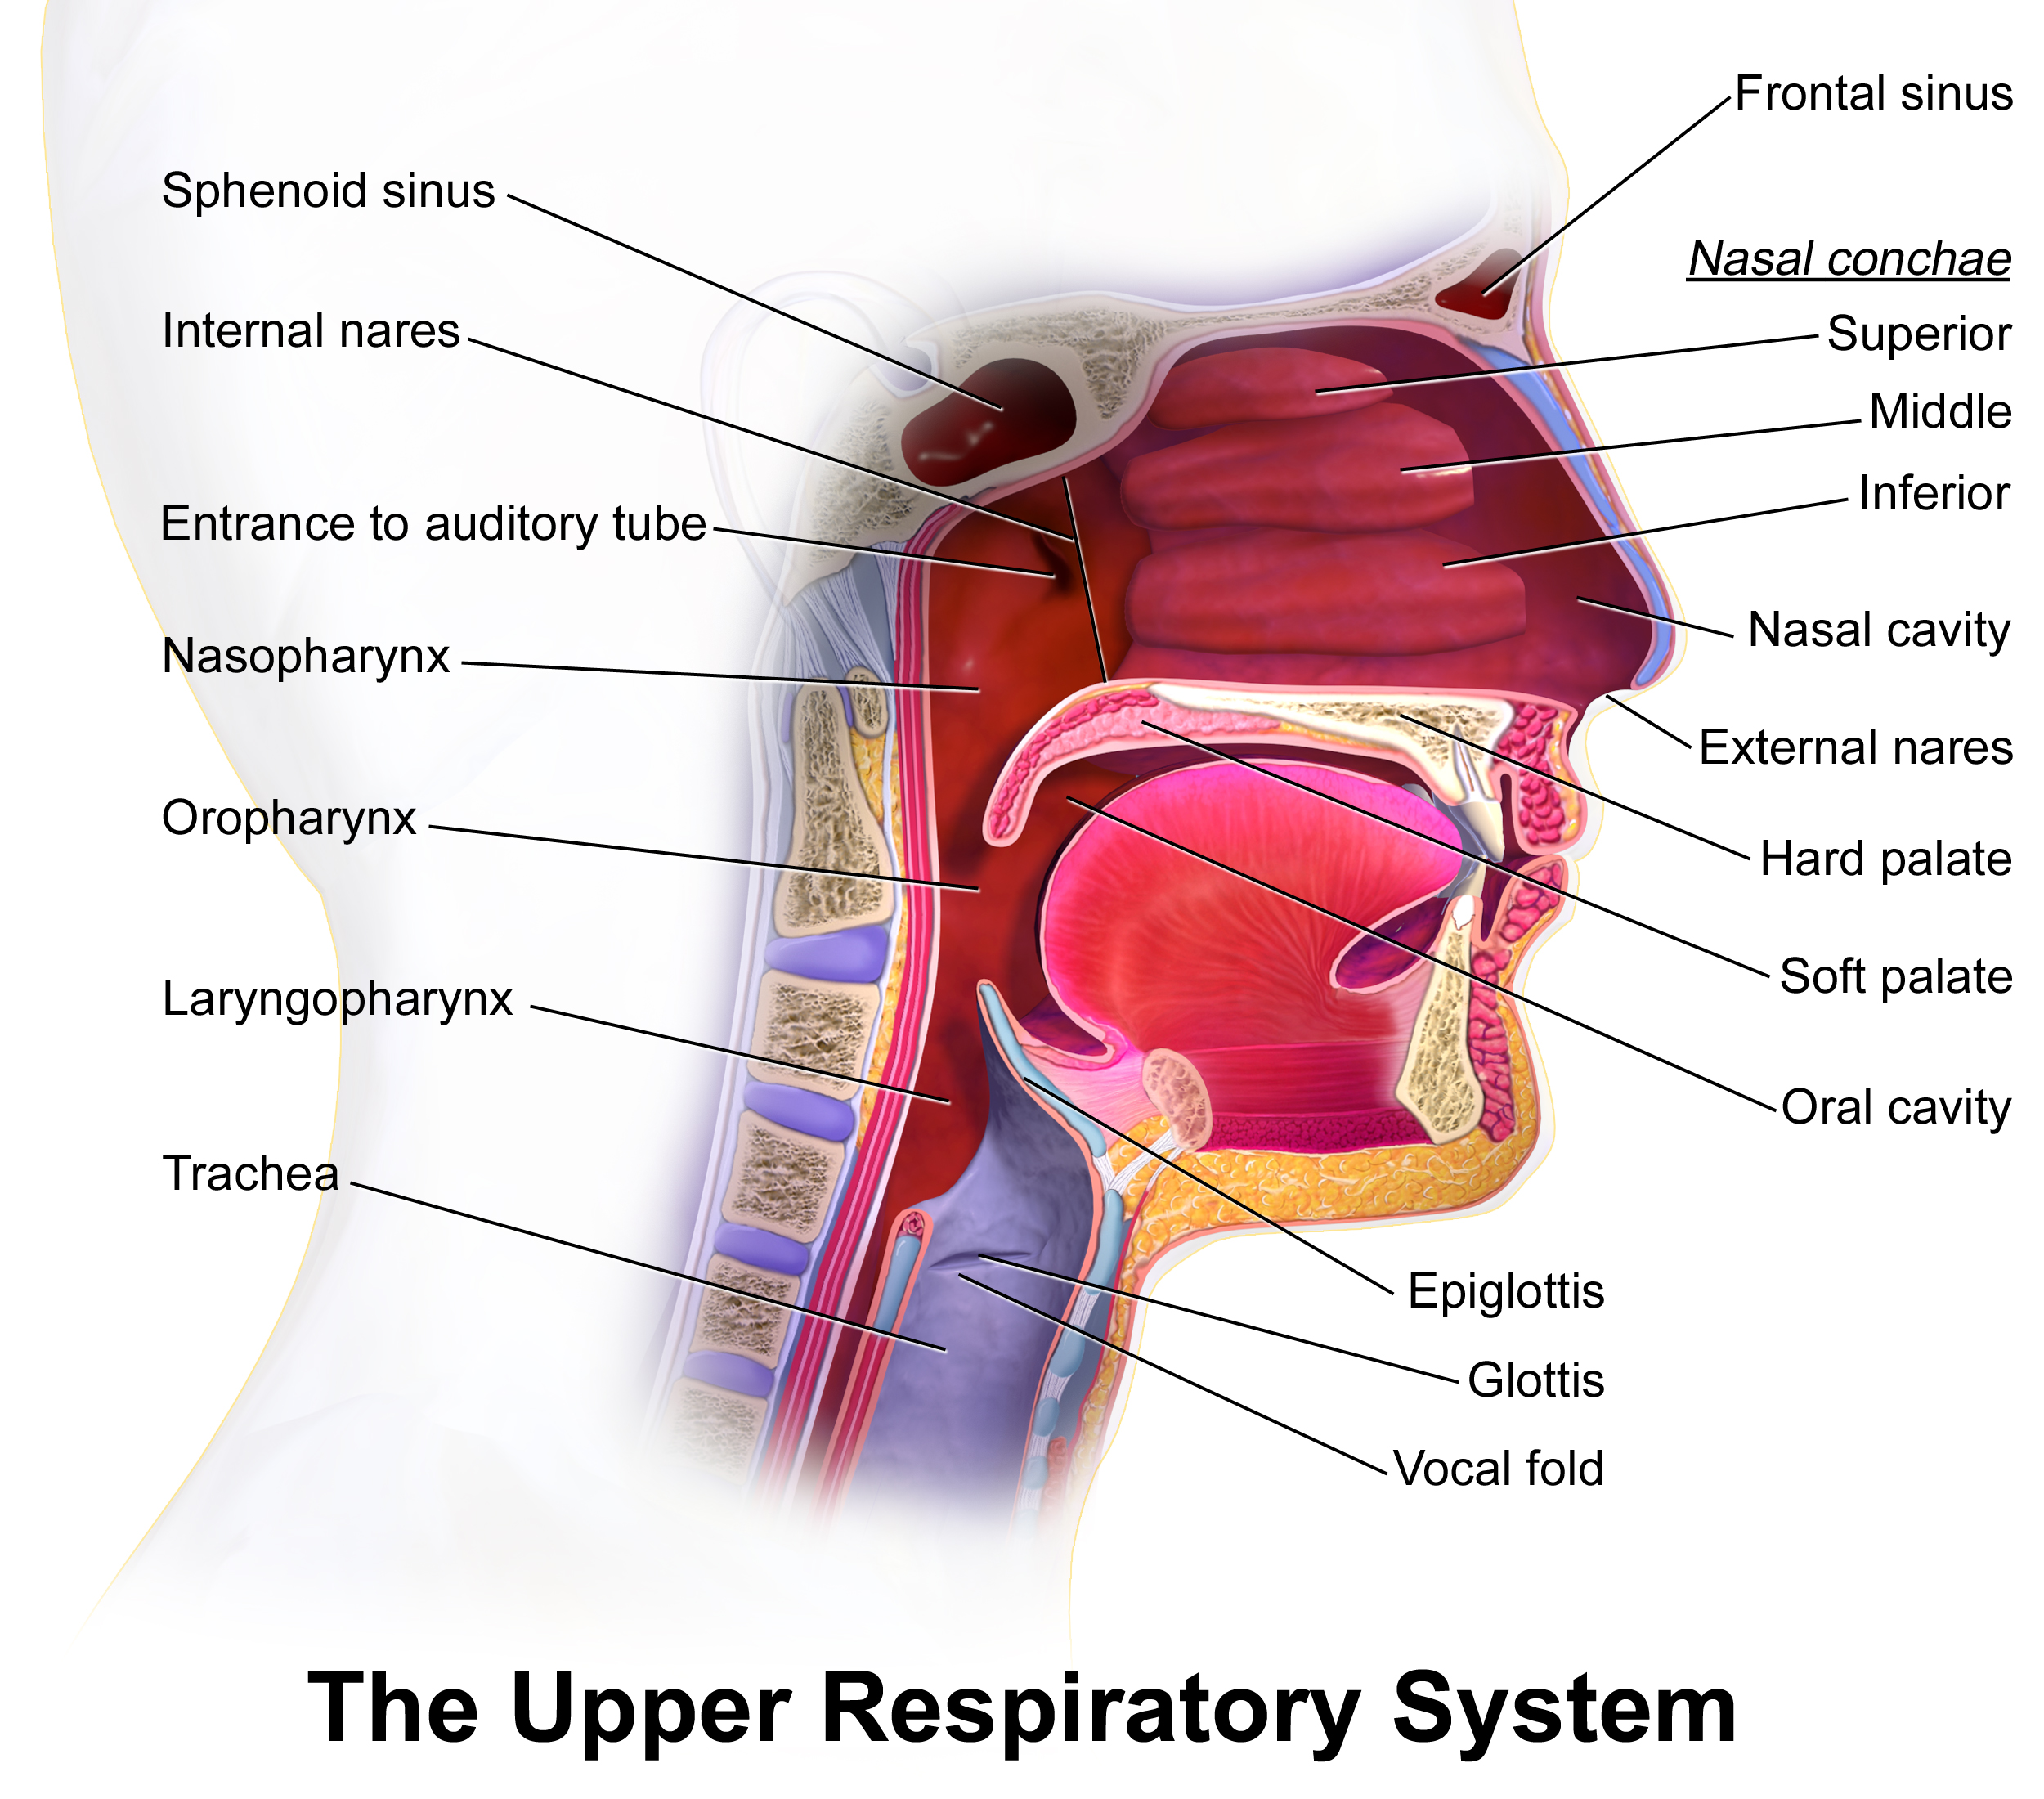 The upper respiratory system.